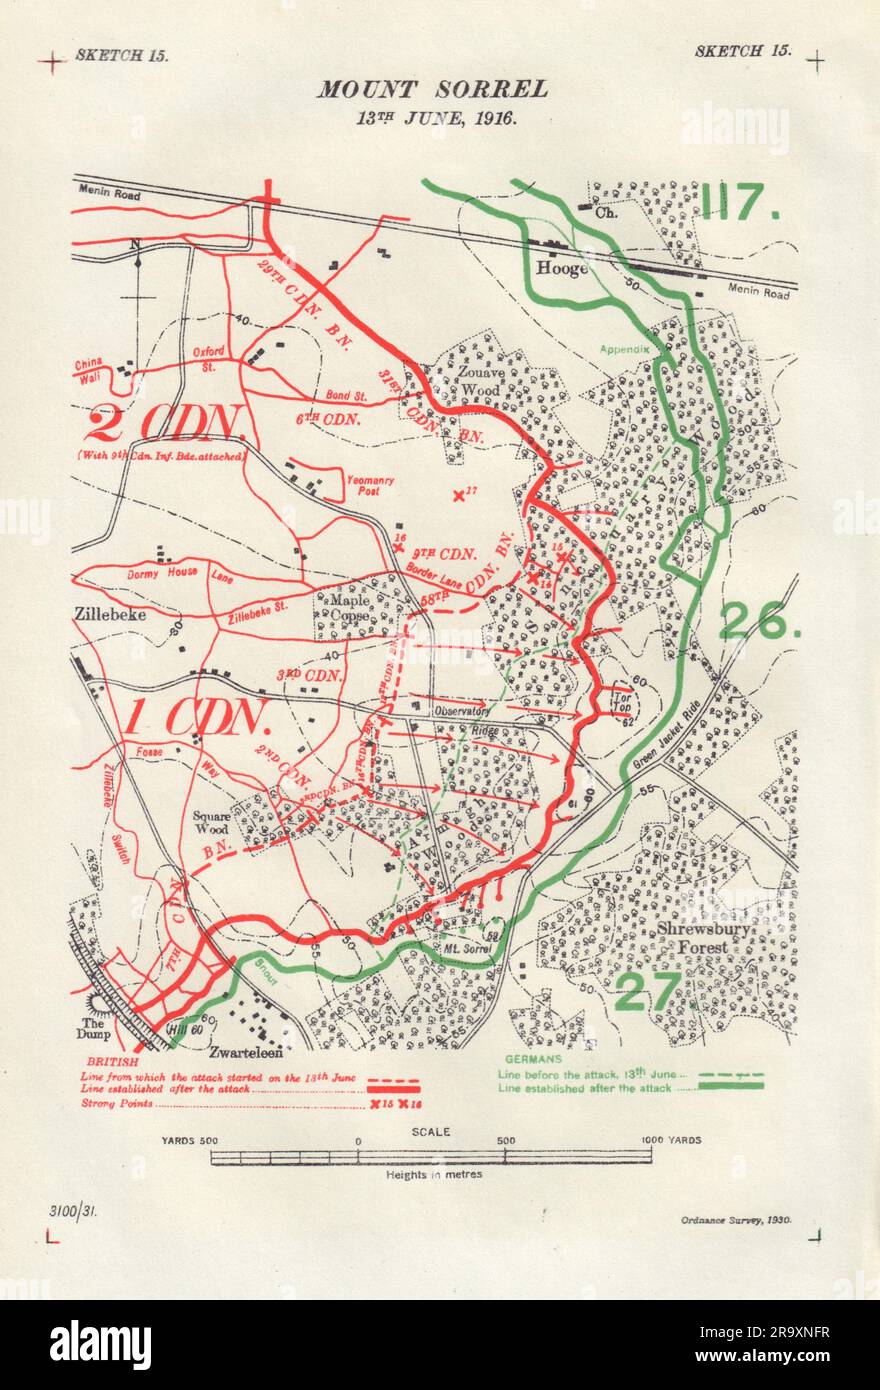 Battle of Mount Sorrel, 13th June 1916. Ypres Salient. WW1. Trenches 1932 map Stock Photo